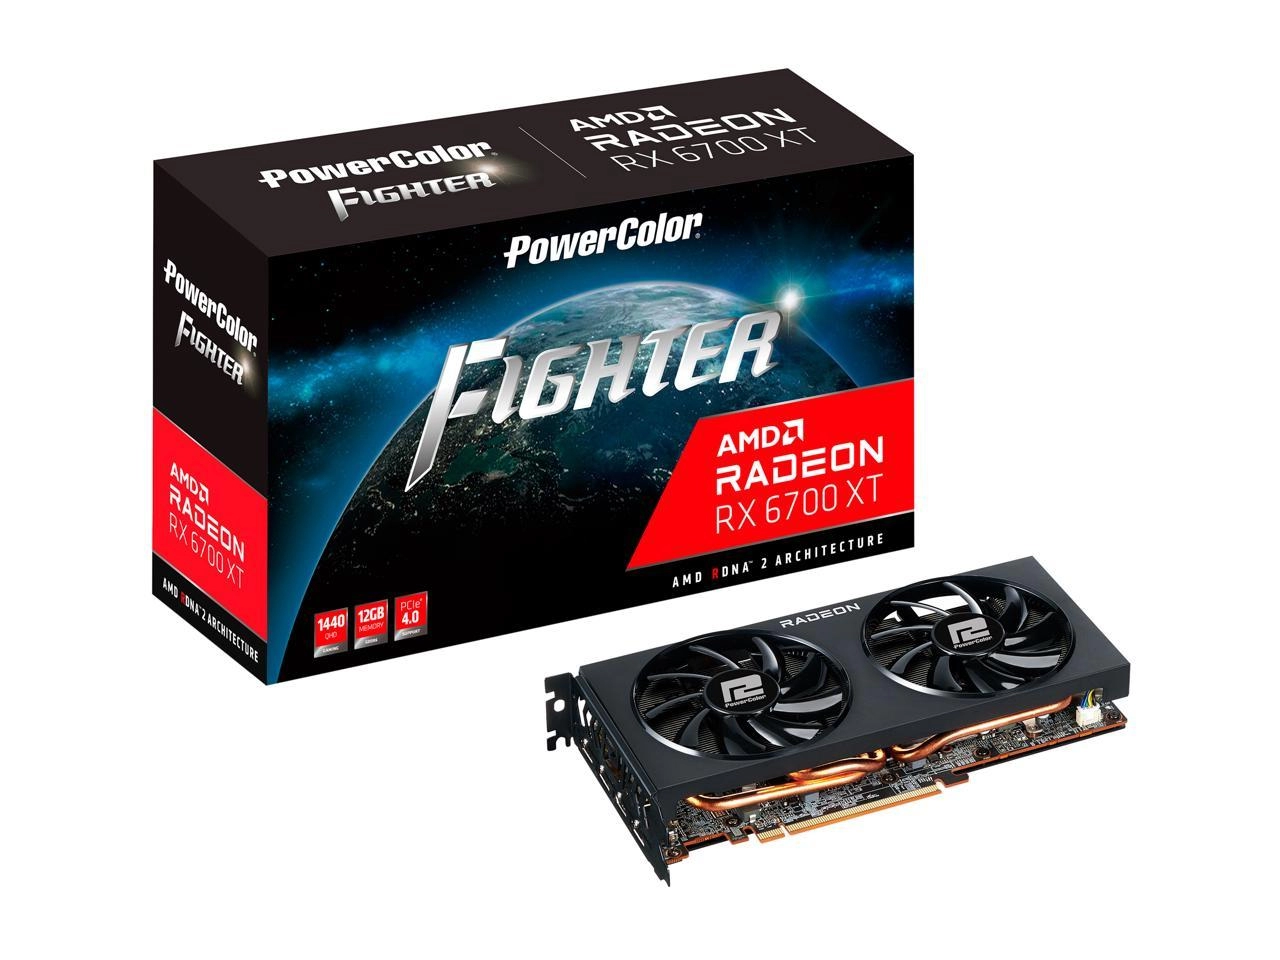 PowerColor Fighter AMD Radeon RX 6700 12GB GDDR6 Package